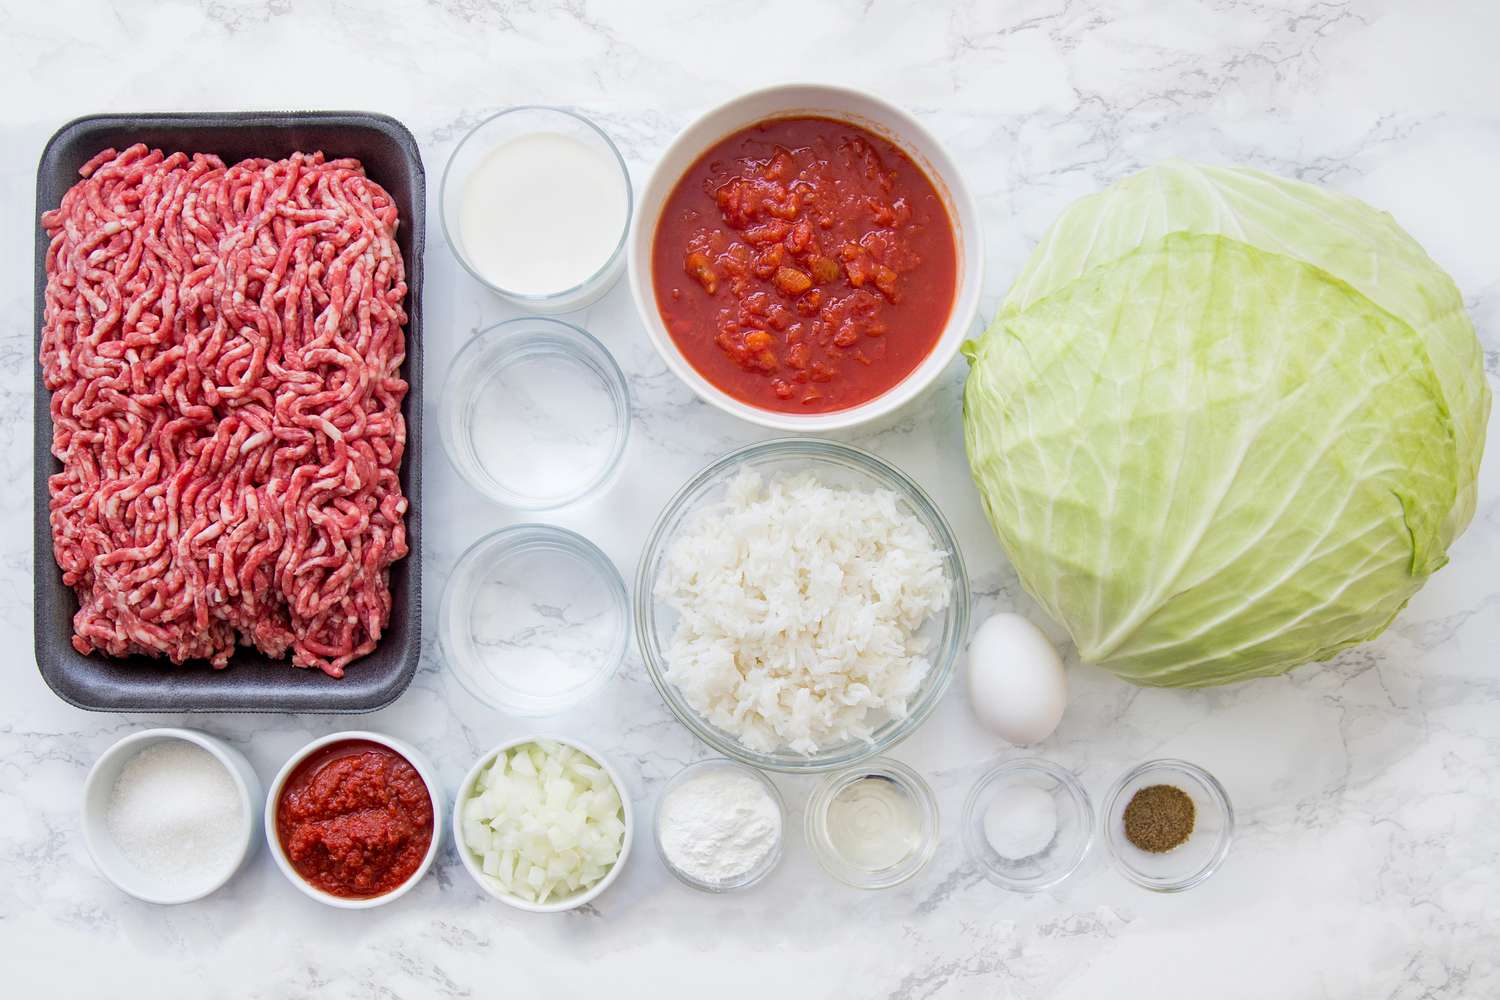 Ingredients for stuffed cabbage rolls recipe gathered